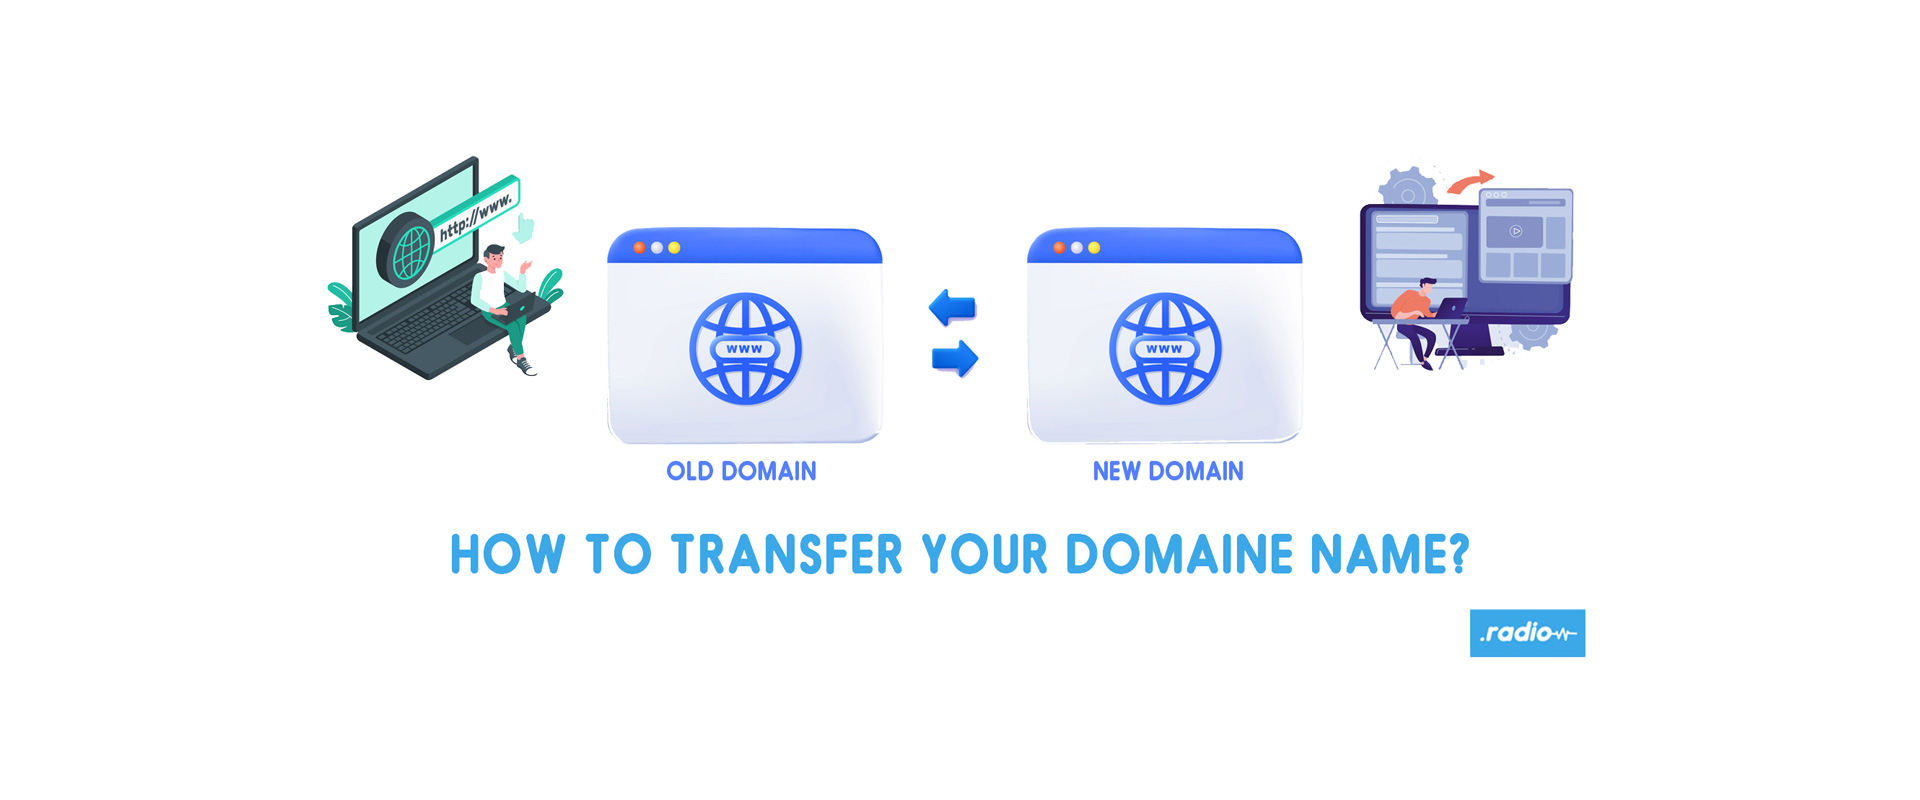 How to transfer domain name